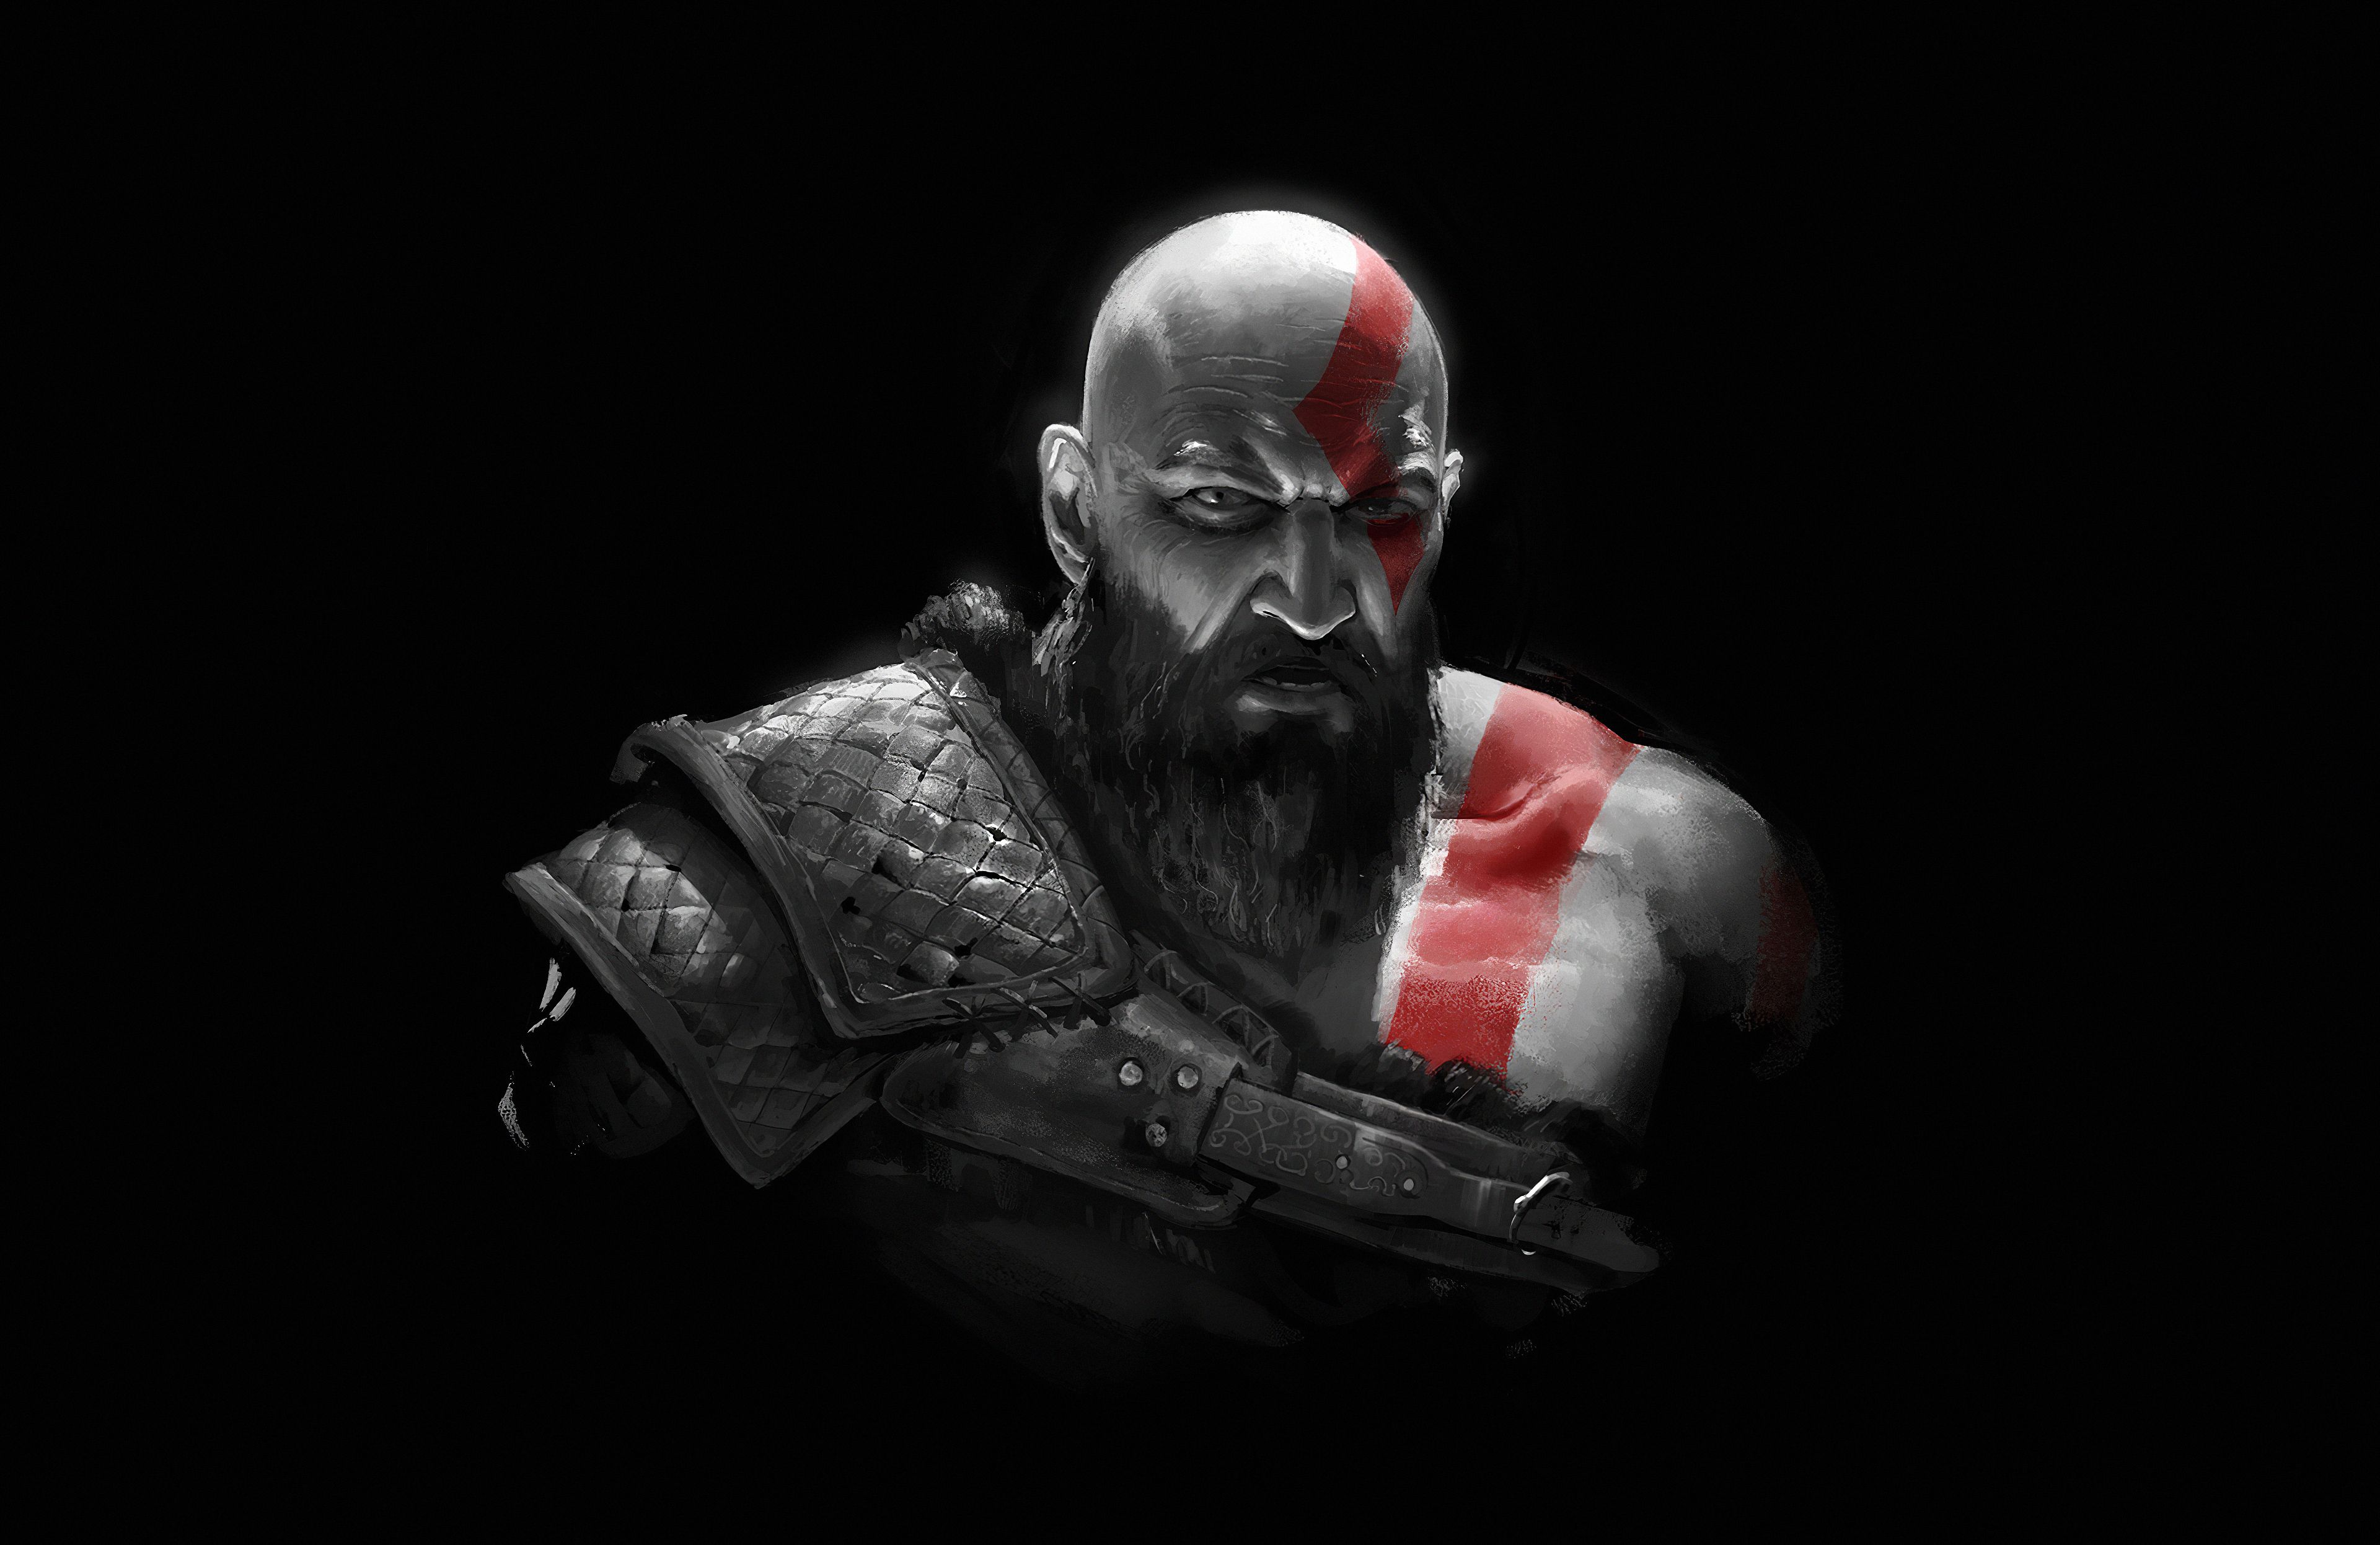 Kratos GoW Amoled Wallpaper, HD Games 4K Wallpaper, Image, Photo and Background